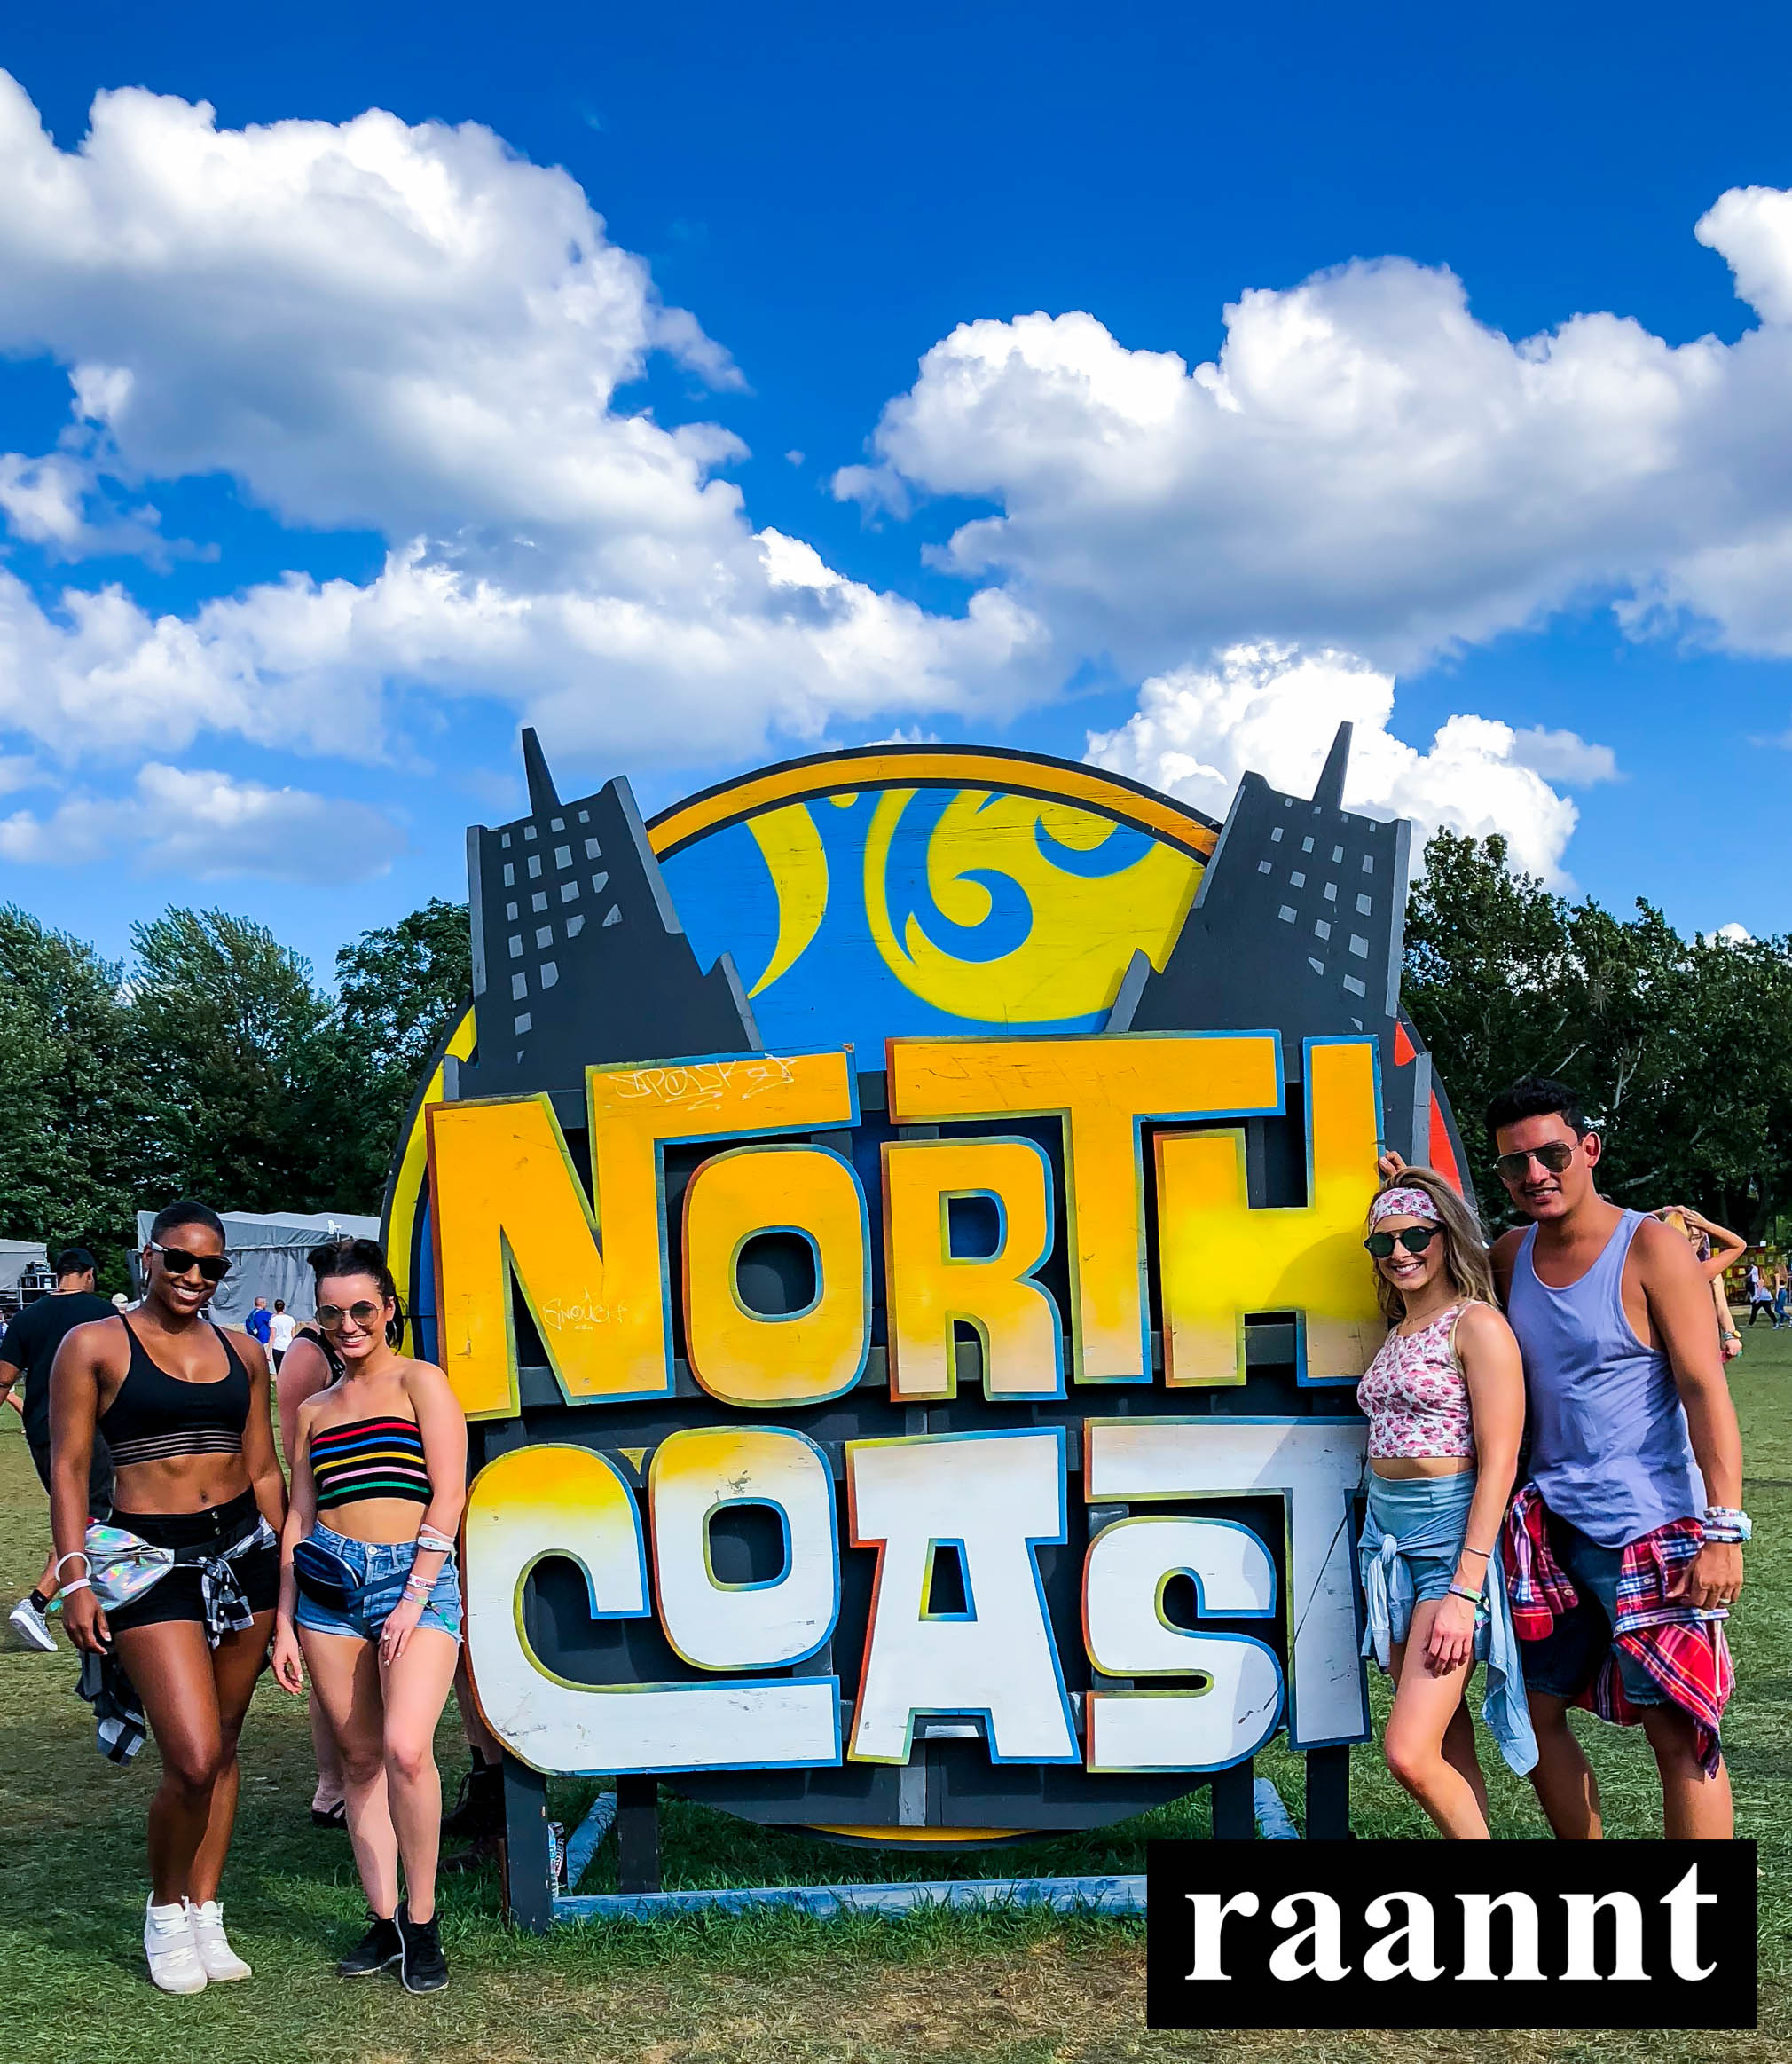 North Coast Music Festival, Chicago, IL. 116K likes. "Summer's Last Stand" Labor Day Weekend 2018 at Union Park Chicago, IL || northcoastfestival.com.